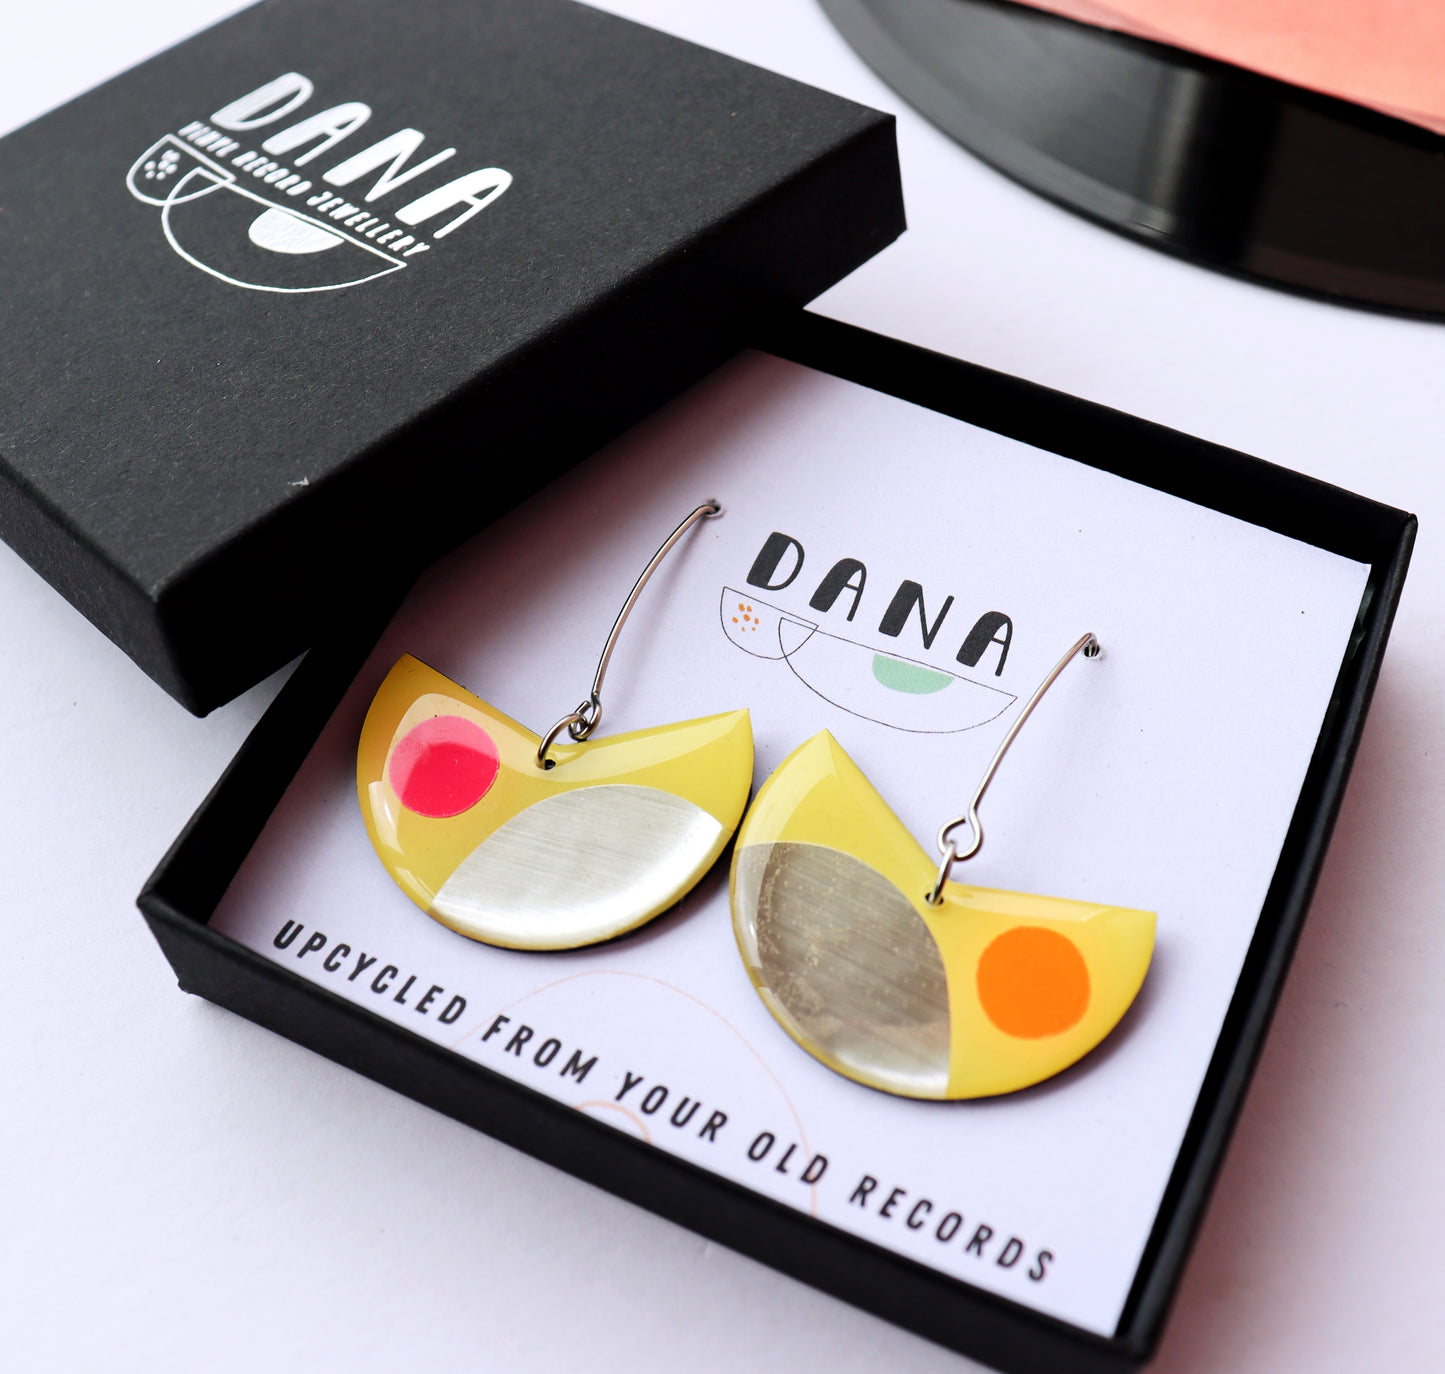 20% OFF 2 pairs left / PACMAN in pastel yellow, hot pink and neon orange / upcycled from your old records